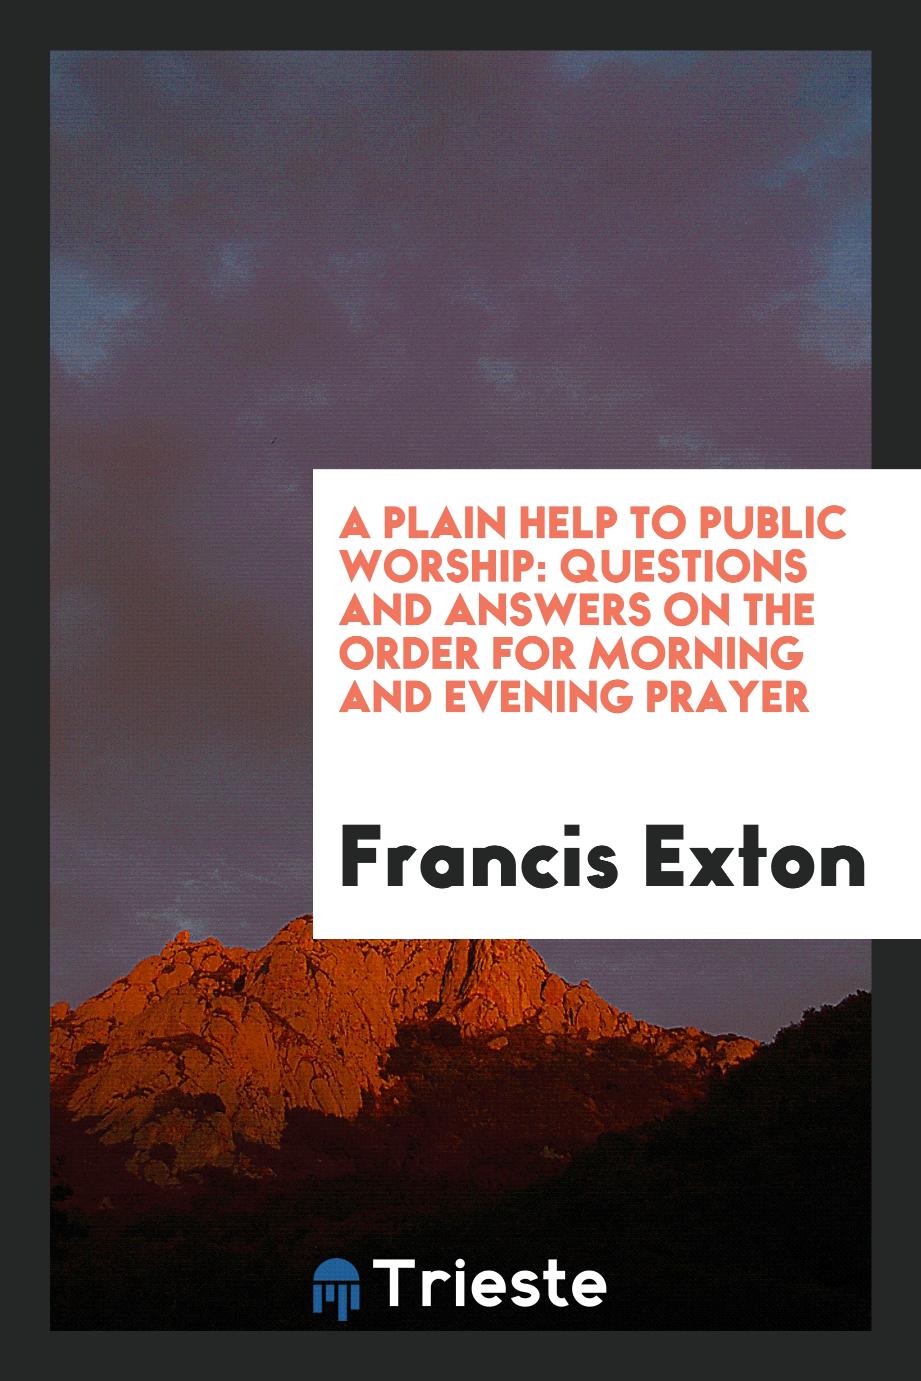 A Plain Help to Public Worship: Questions and Answers on the Order for Morning and Evening Prayer